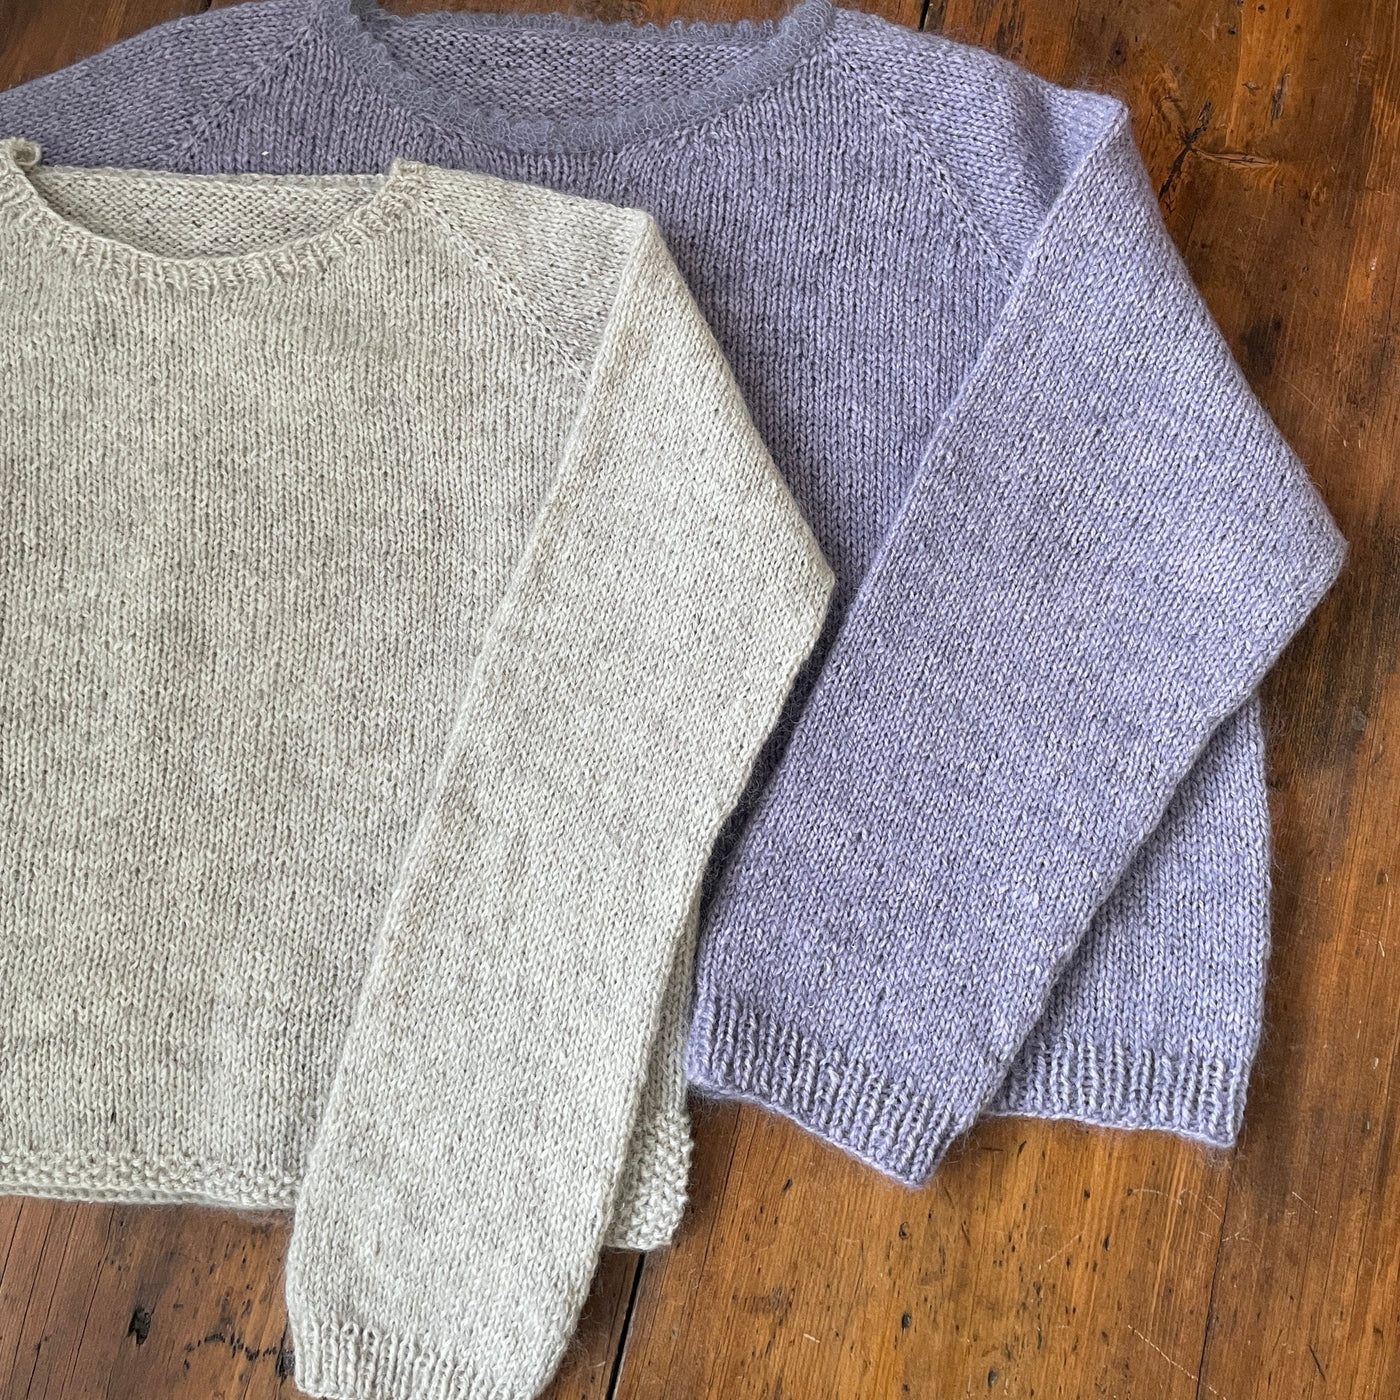 Two sweaters lying on wooden table. Sweaters are The Woolly Thistle Vanilla Fluff pattern in lavender and light grey. 